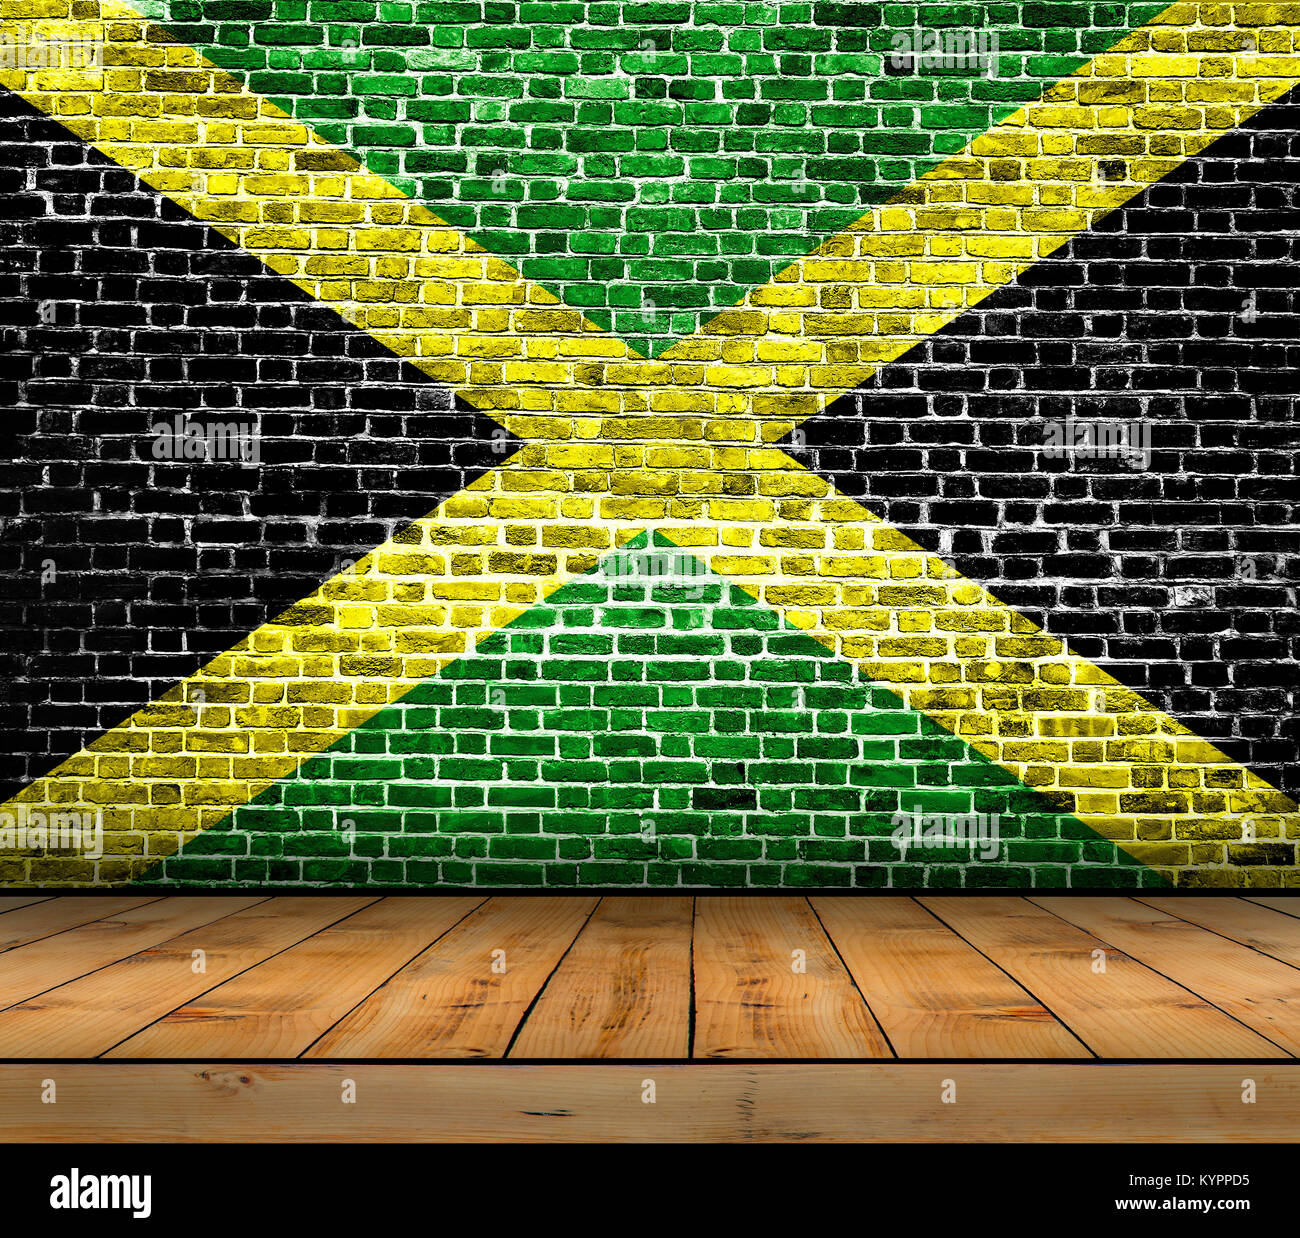 Jamaica flag painted on brick wall with wooden floor Stock Photo